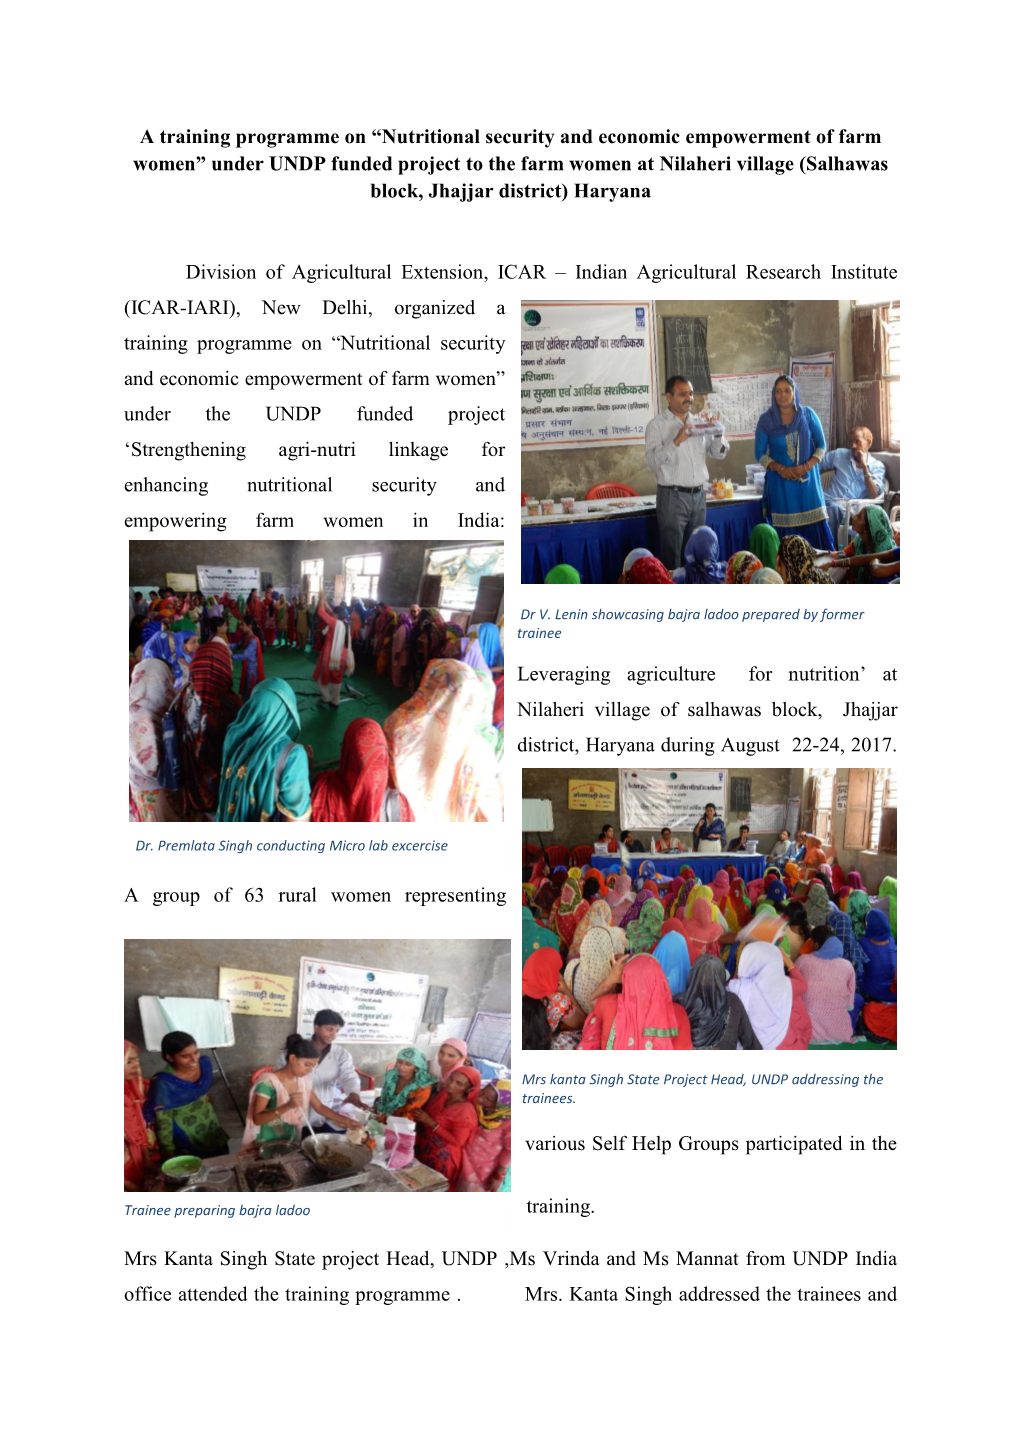 A Training Programme on “Nutritional Security and Economic Empowerment of Farm Women”